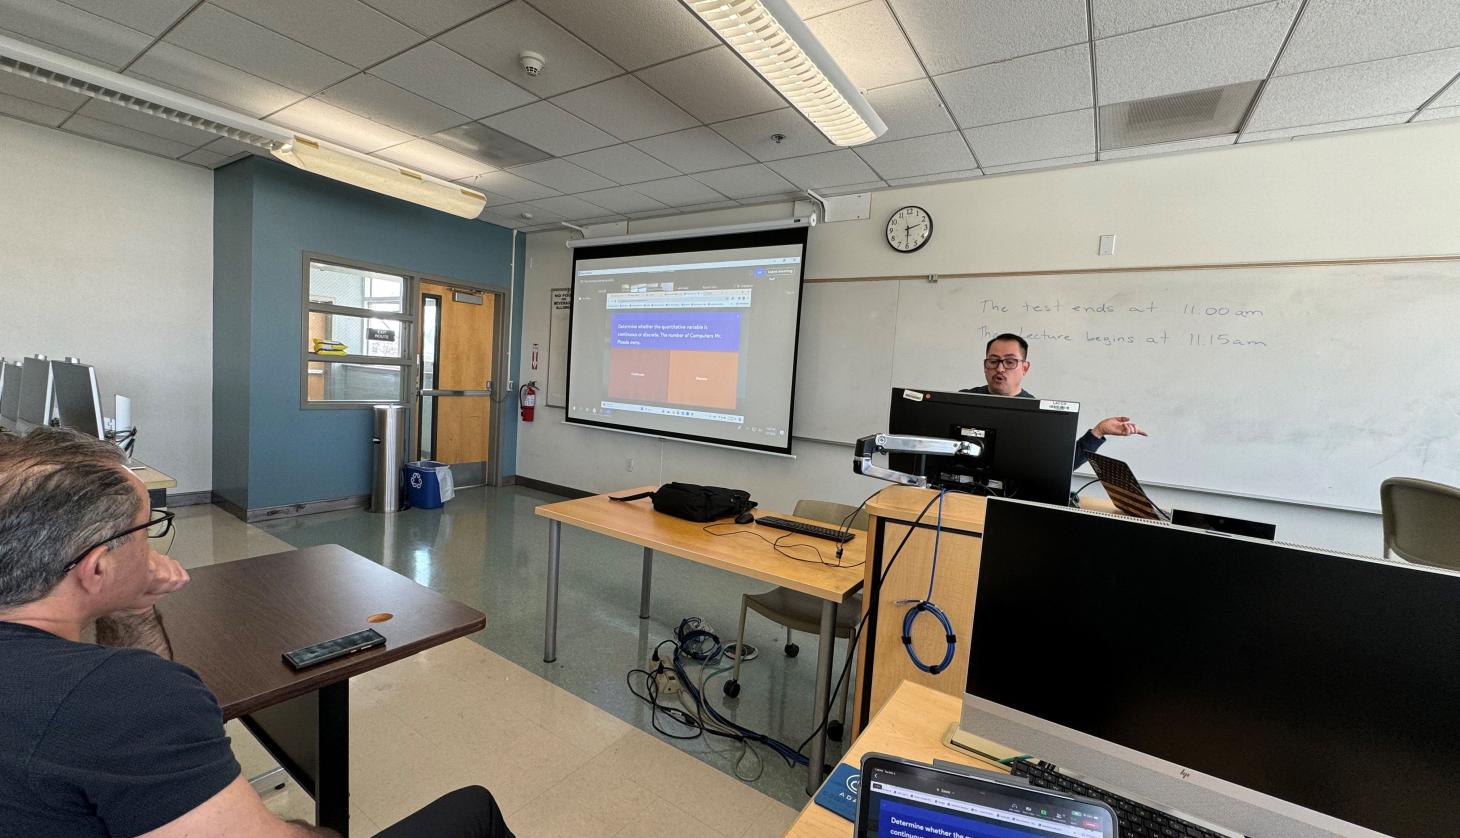 Image of Professor Pineda with a presentation of Kahoot.